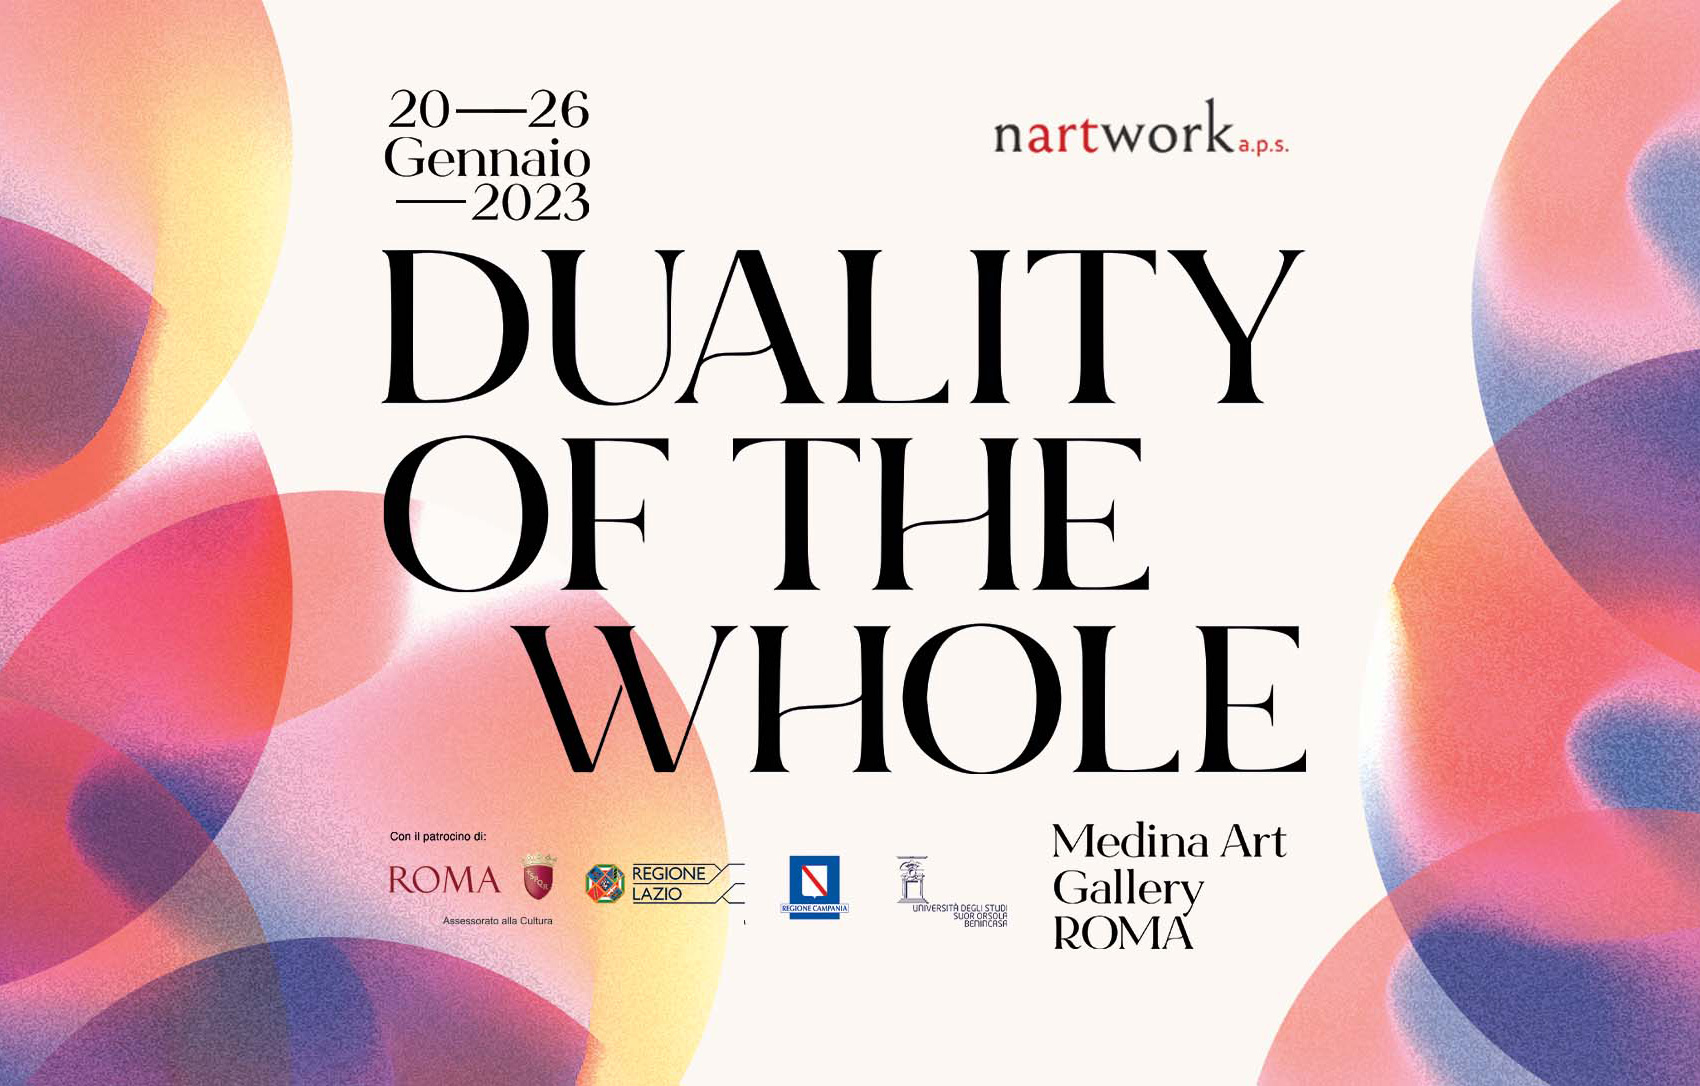 Nartwork, mostra Duality of the whole